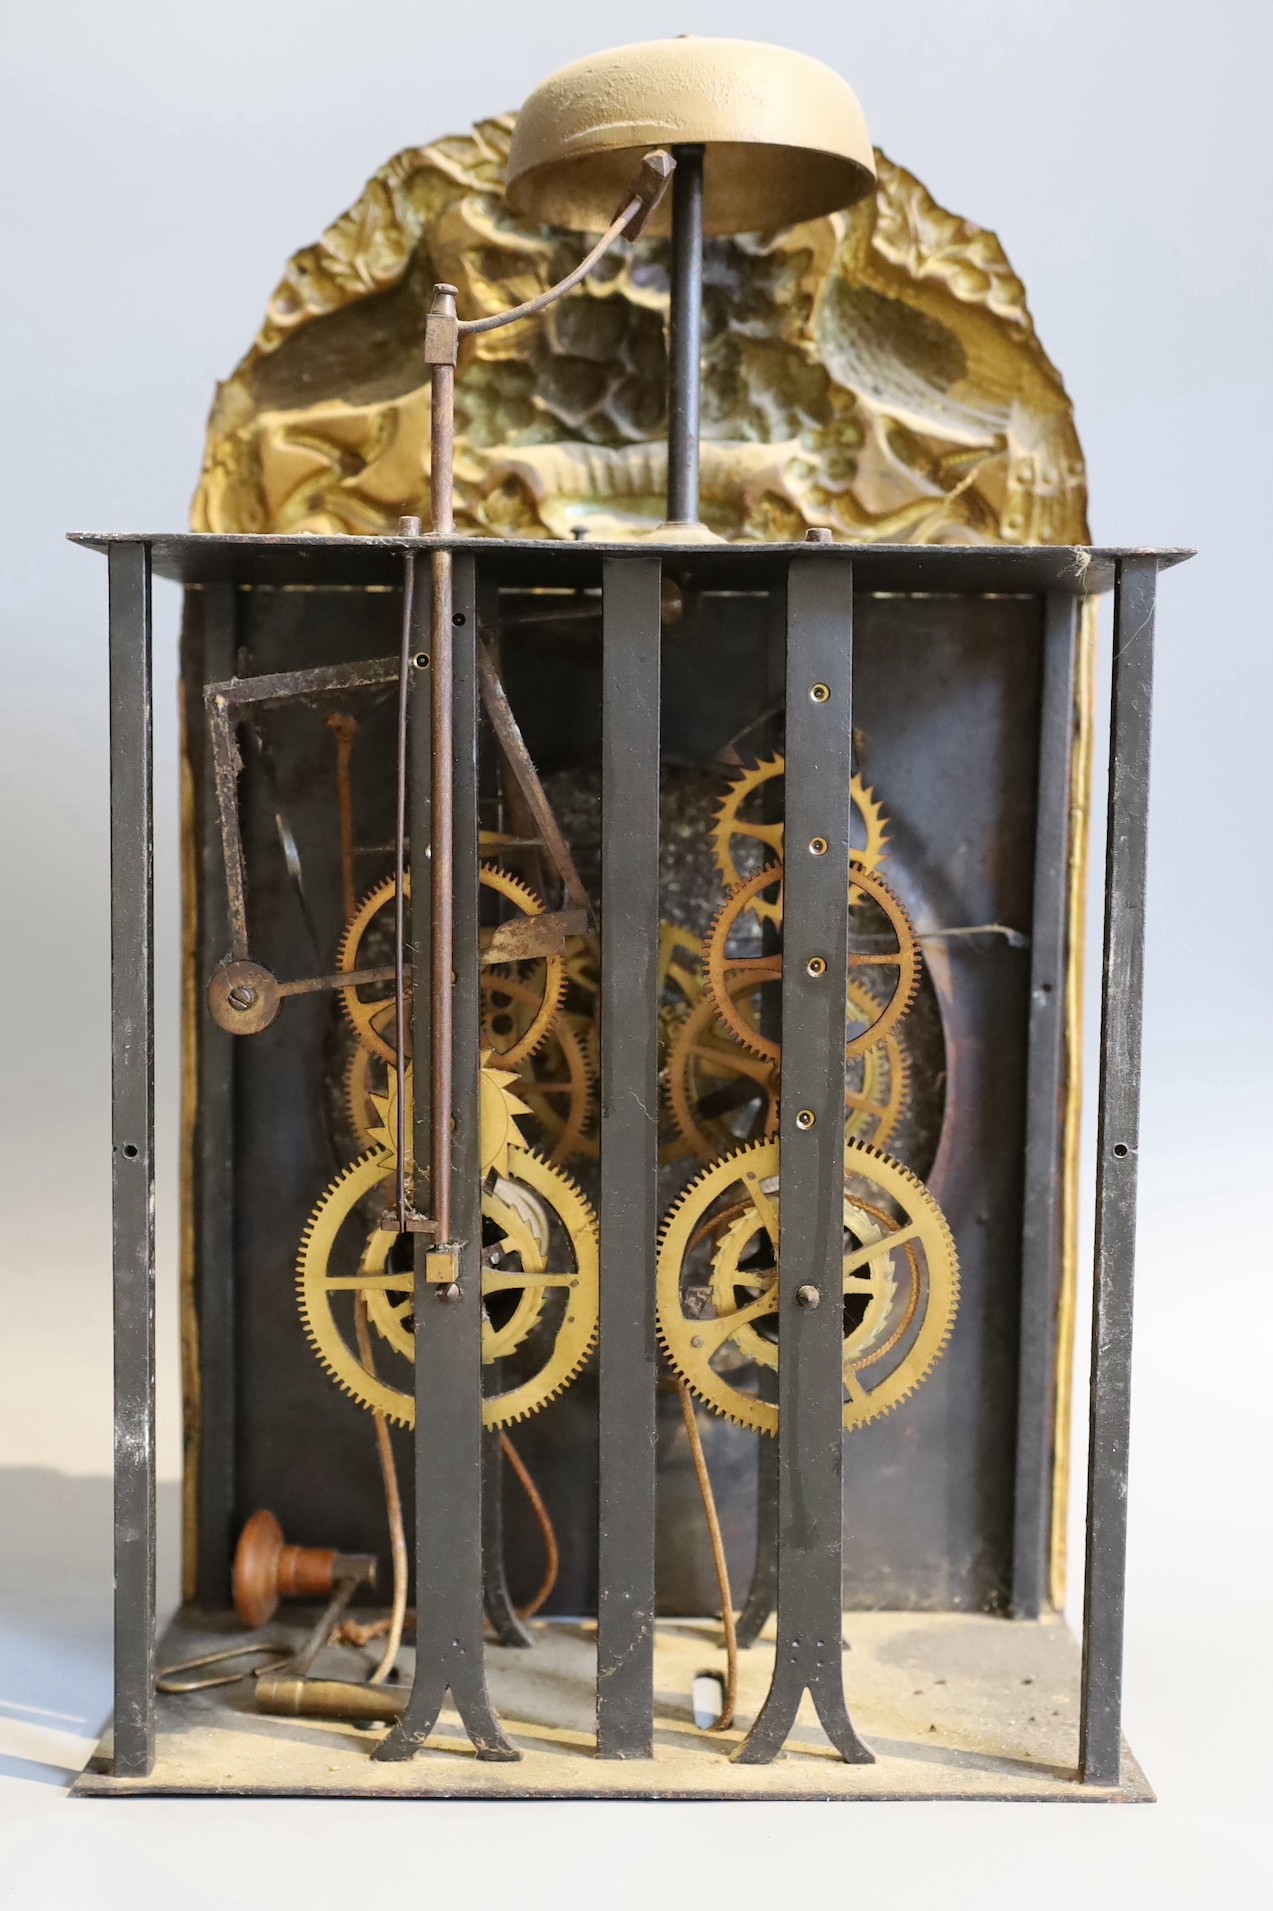 A 19th century French eight day longcase clock movement, with circular enamelled dial, pendulum and weights